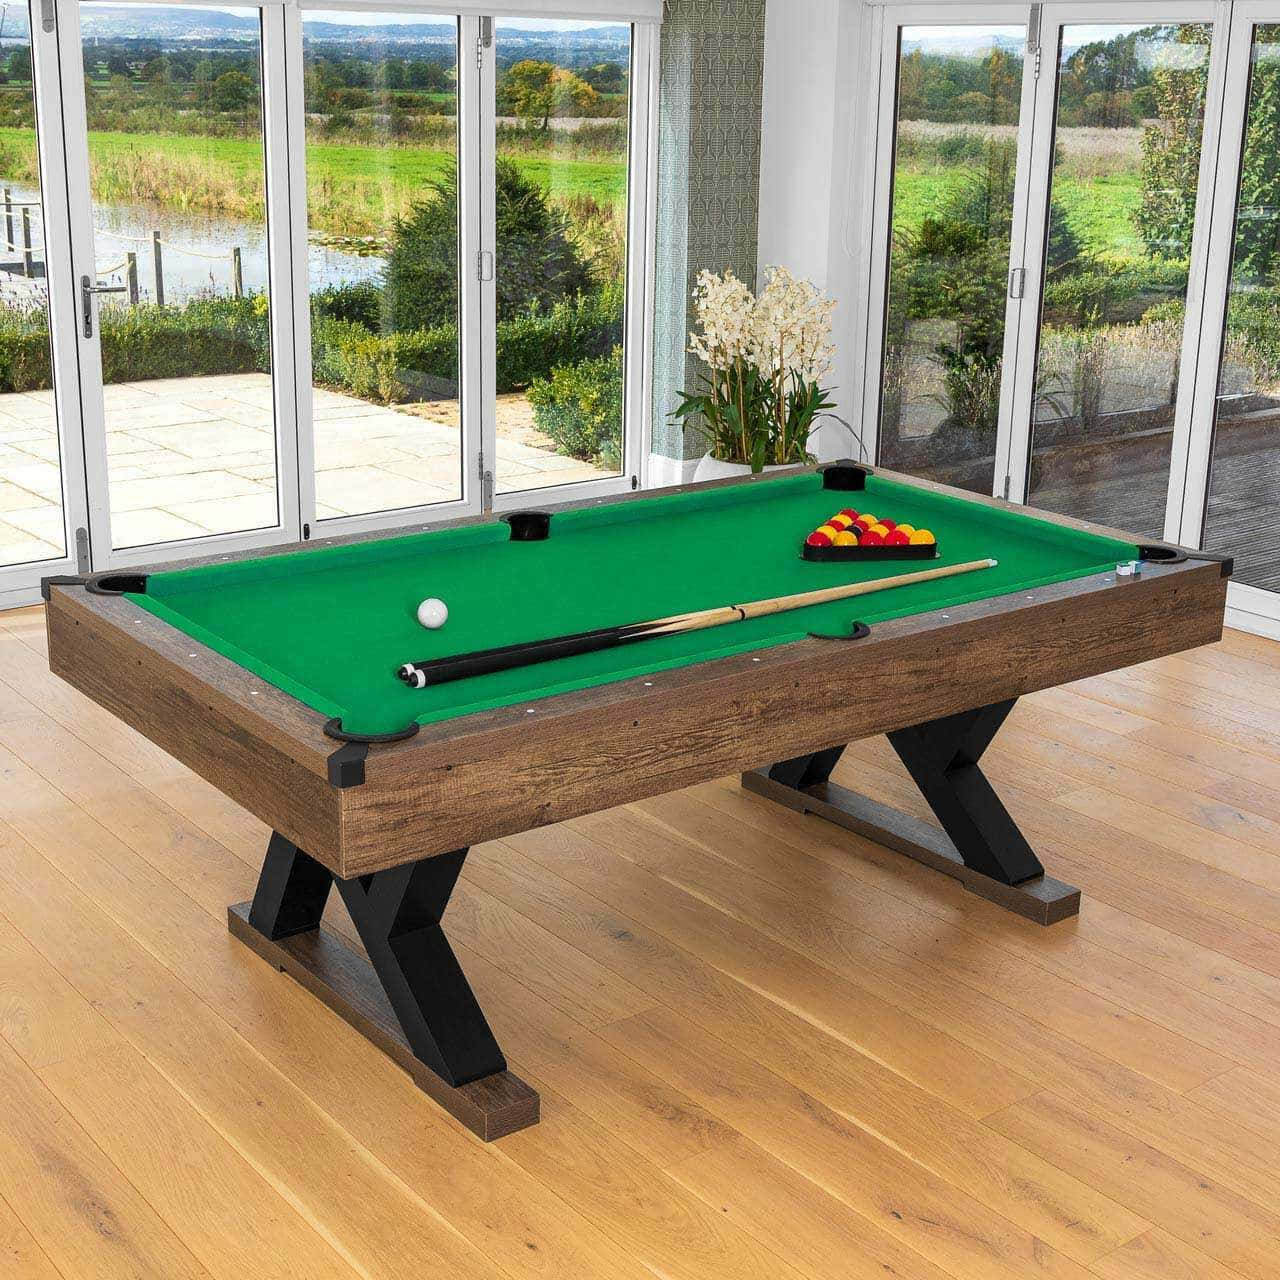 A Pool Table With A Green Cloth And A Ball